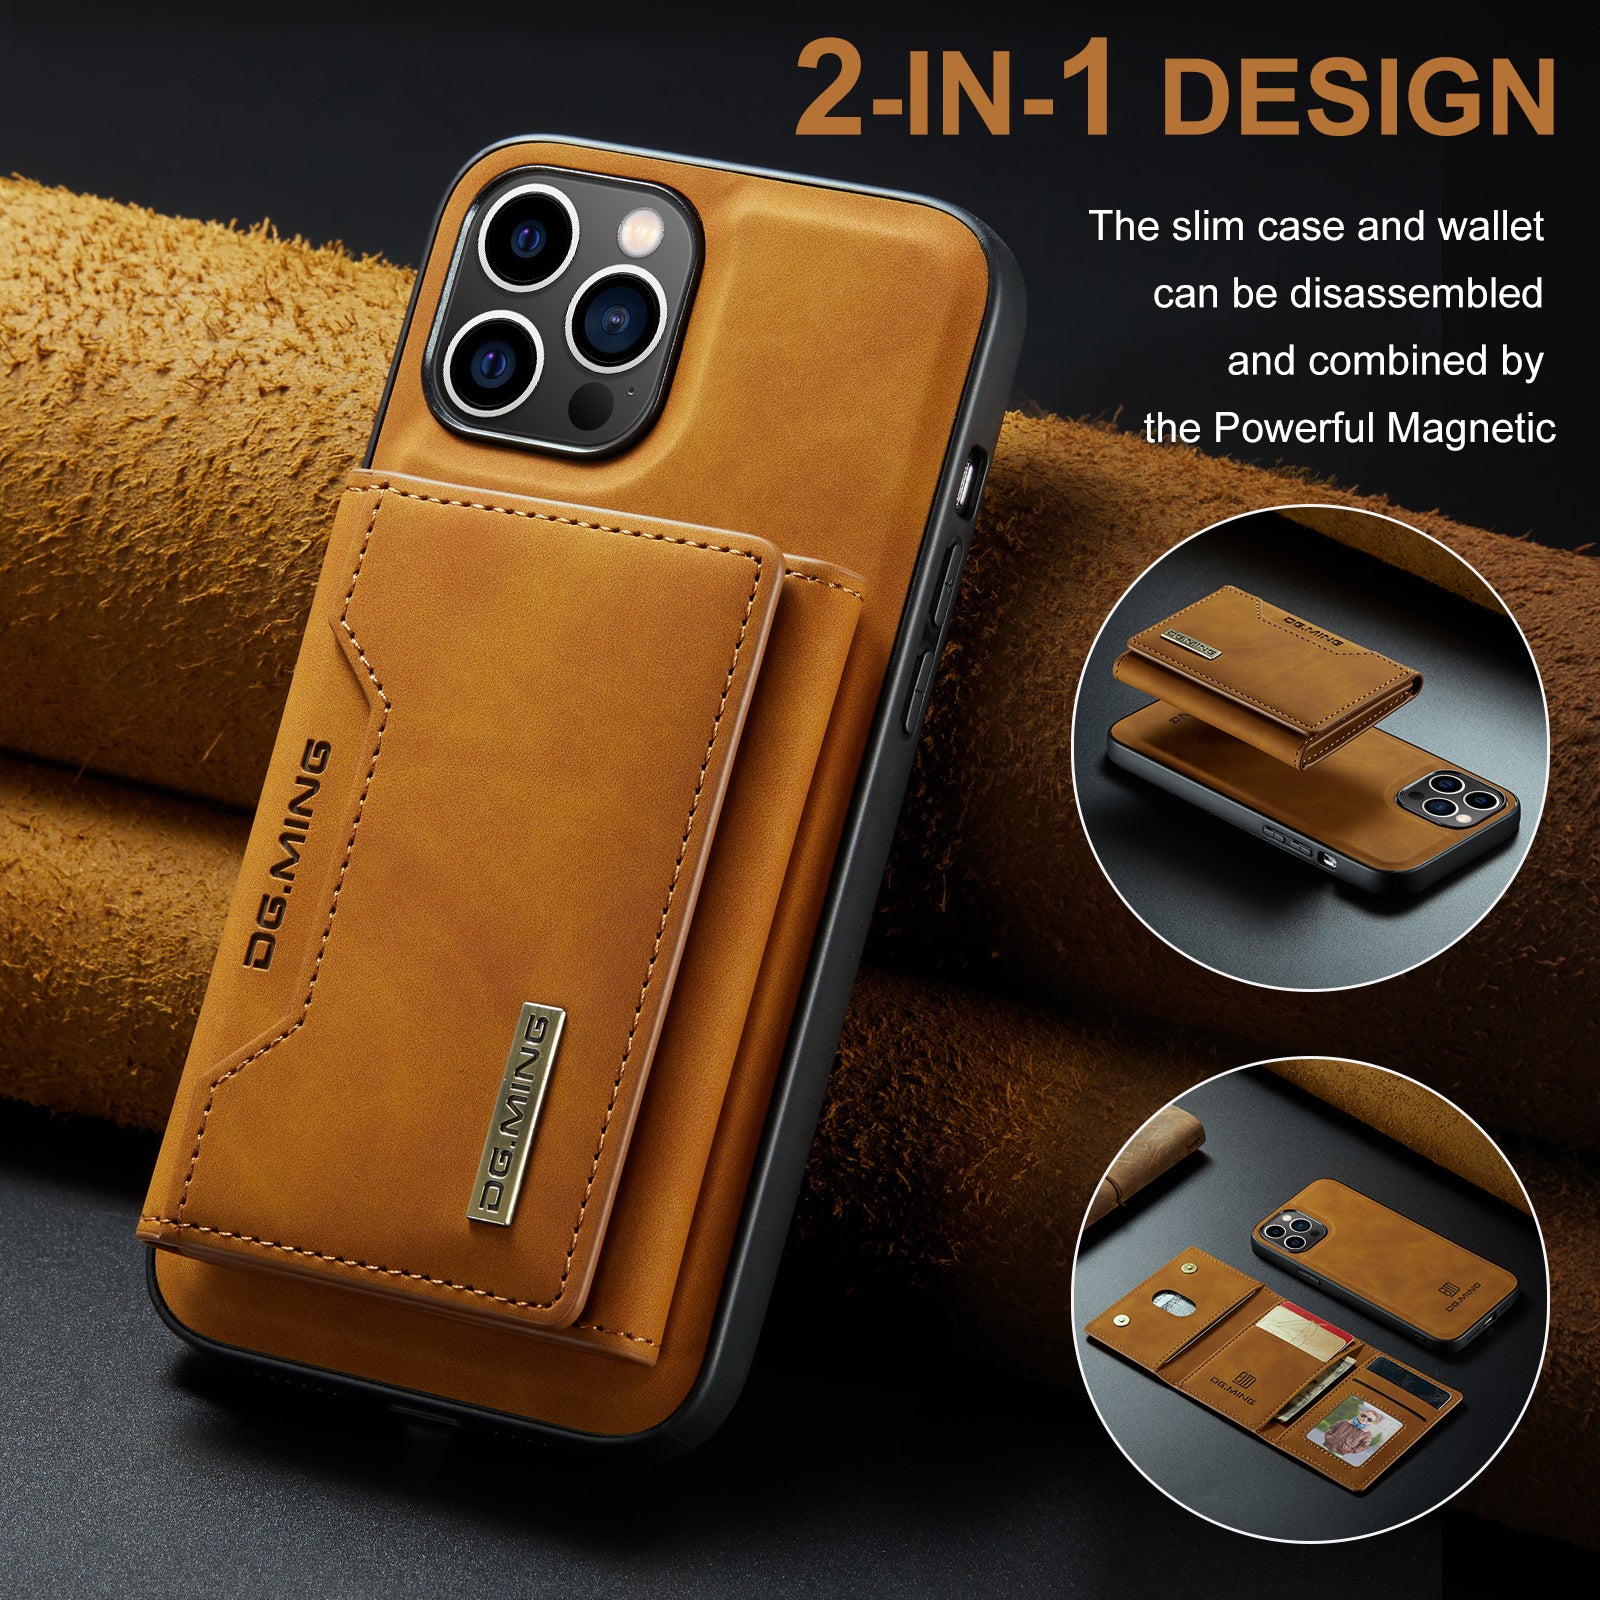 Brown Leather Magnetic Detachable iPhone 12 Pro Max Wallet